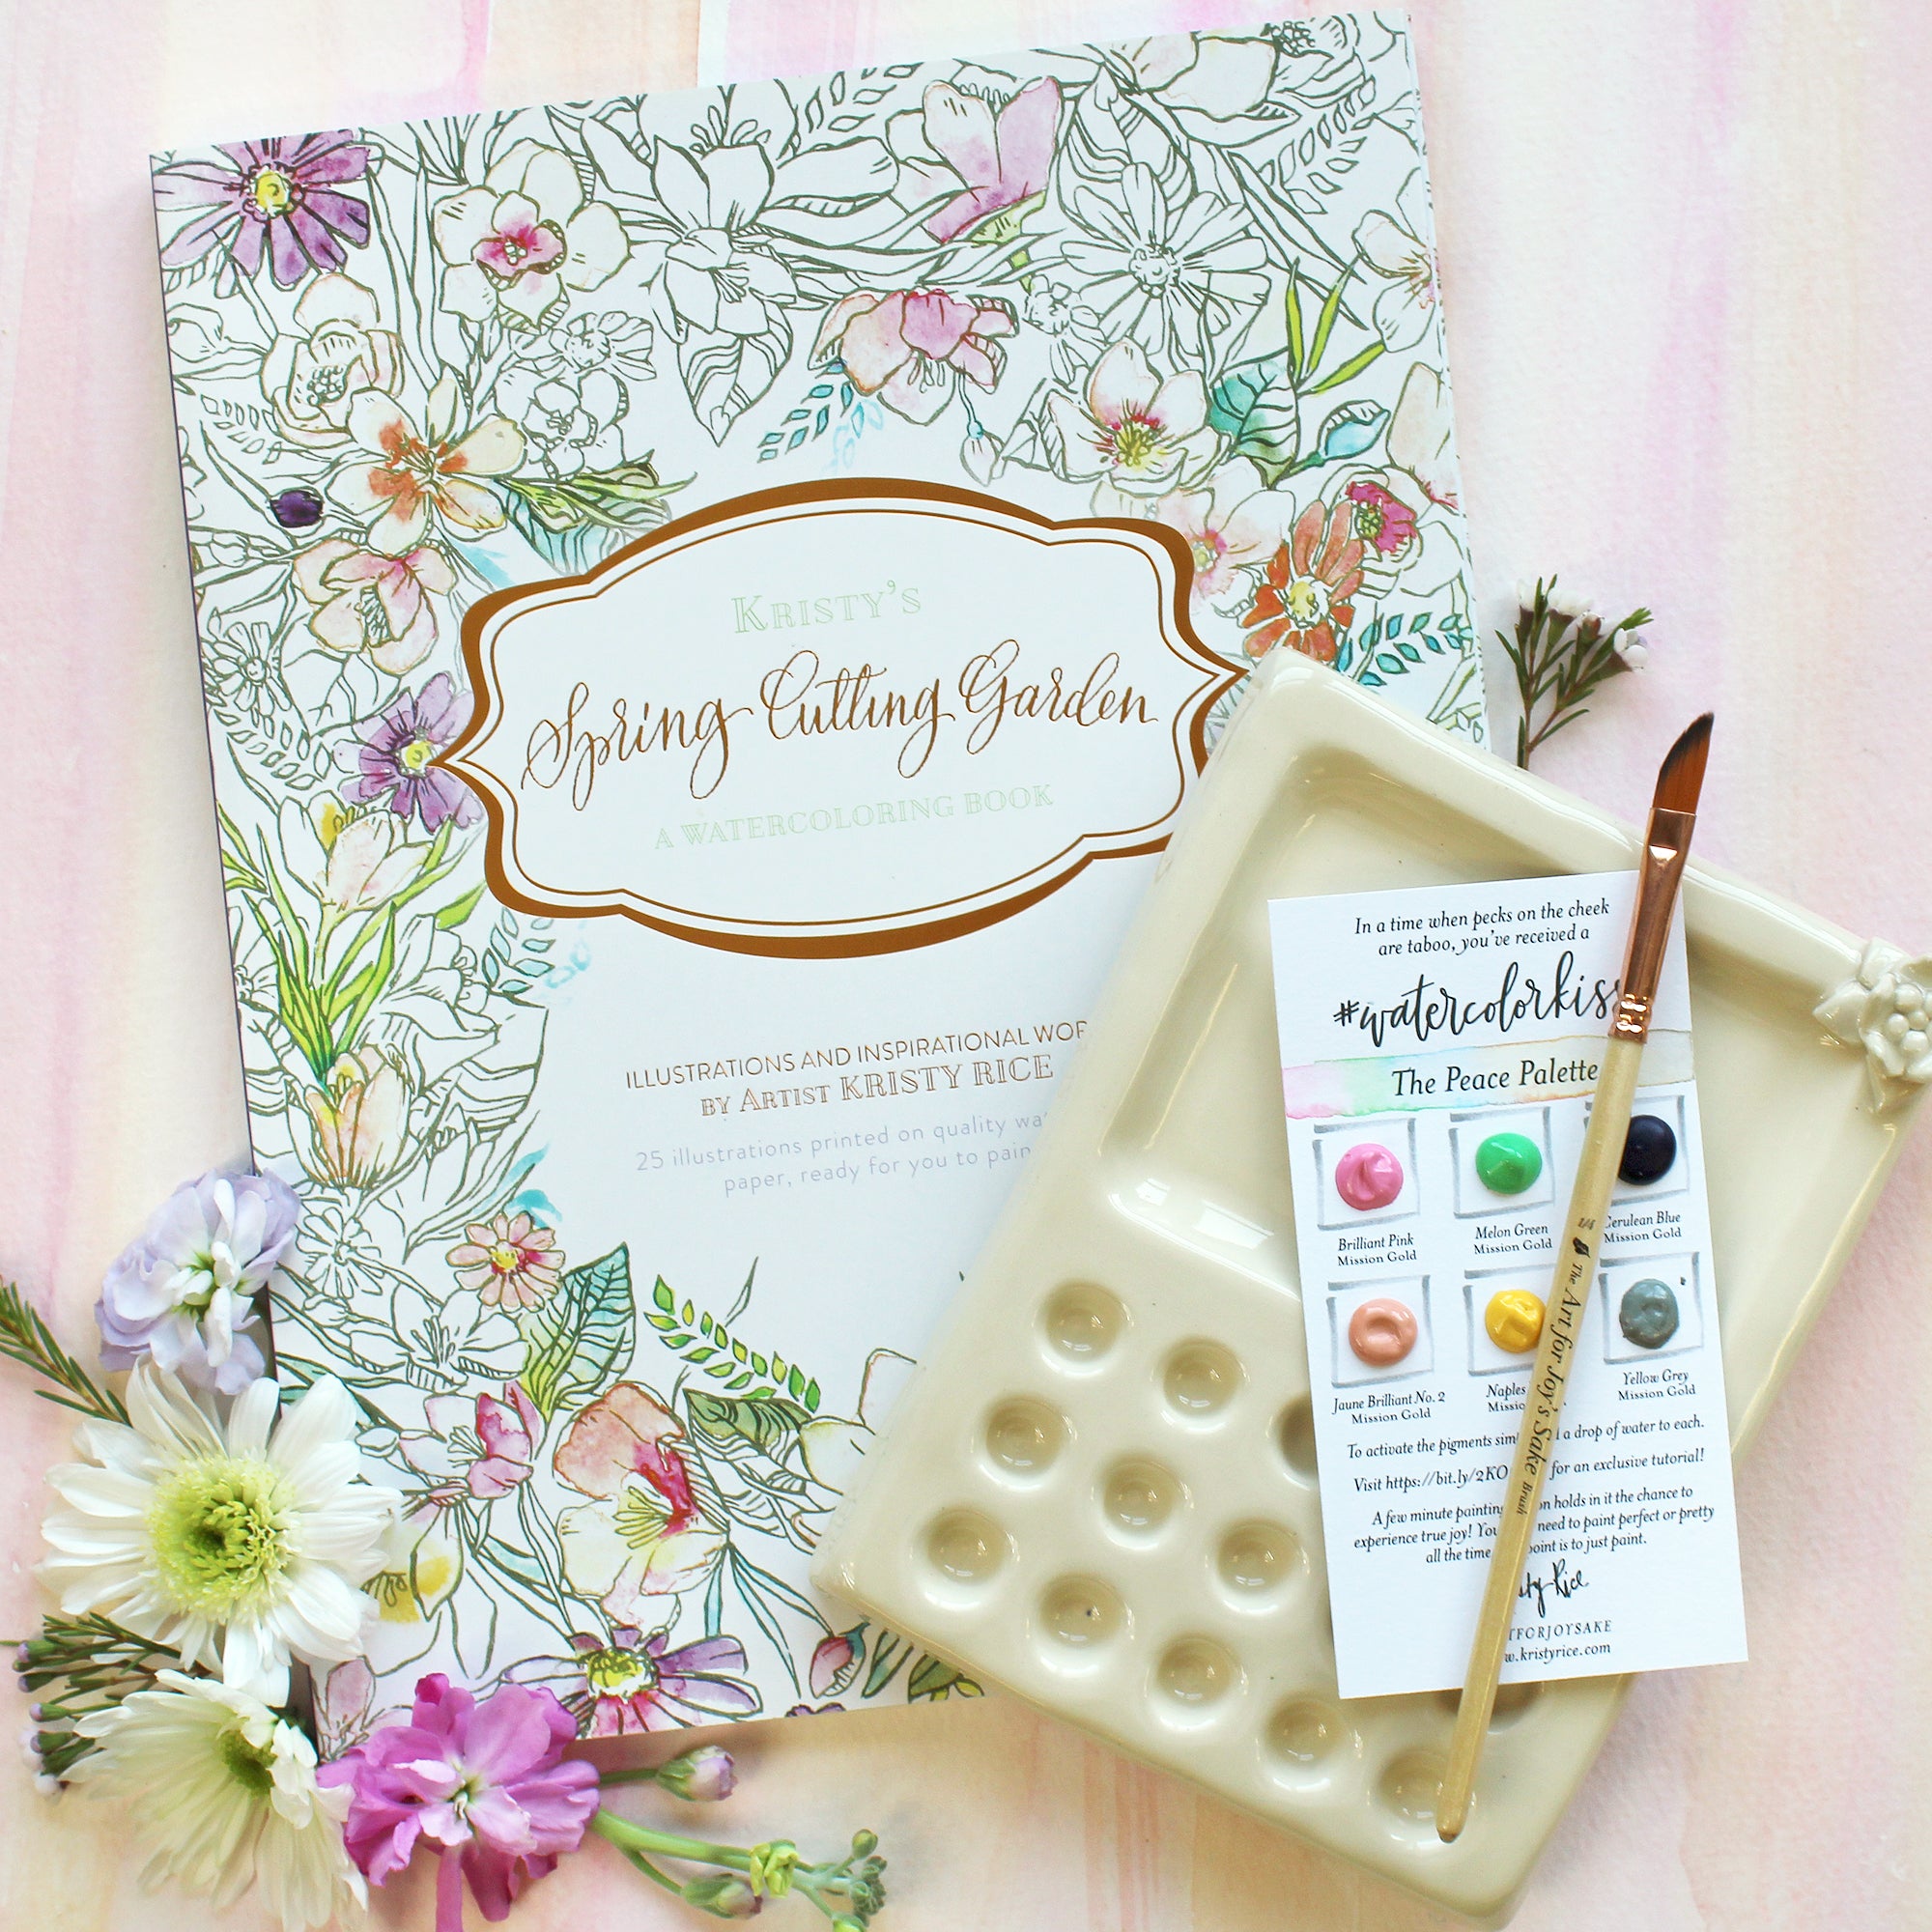 Kristy's Cutting Garden Bundle - Unique Shopping for Artistic Gifts